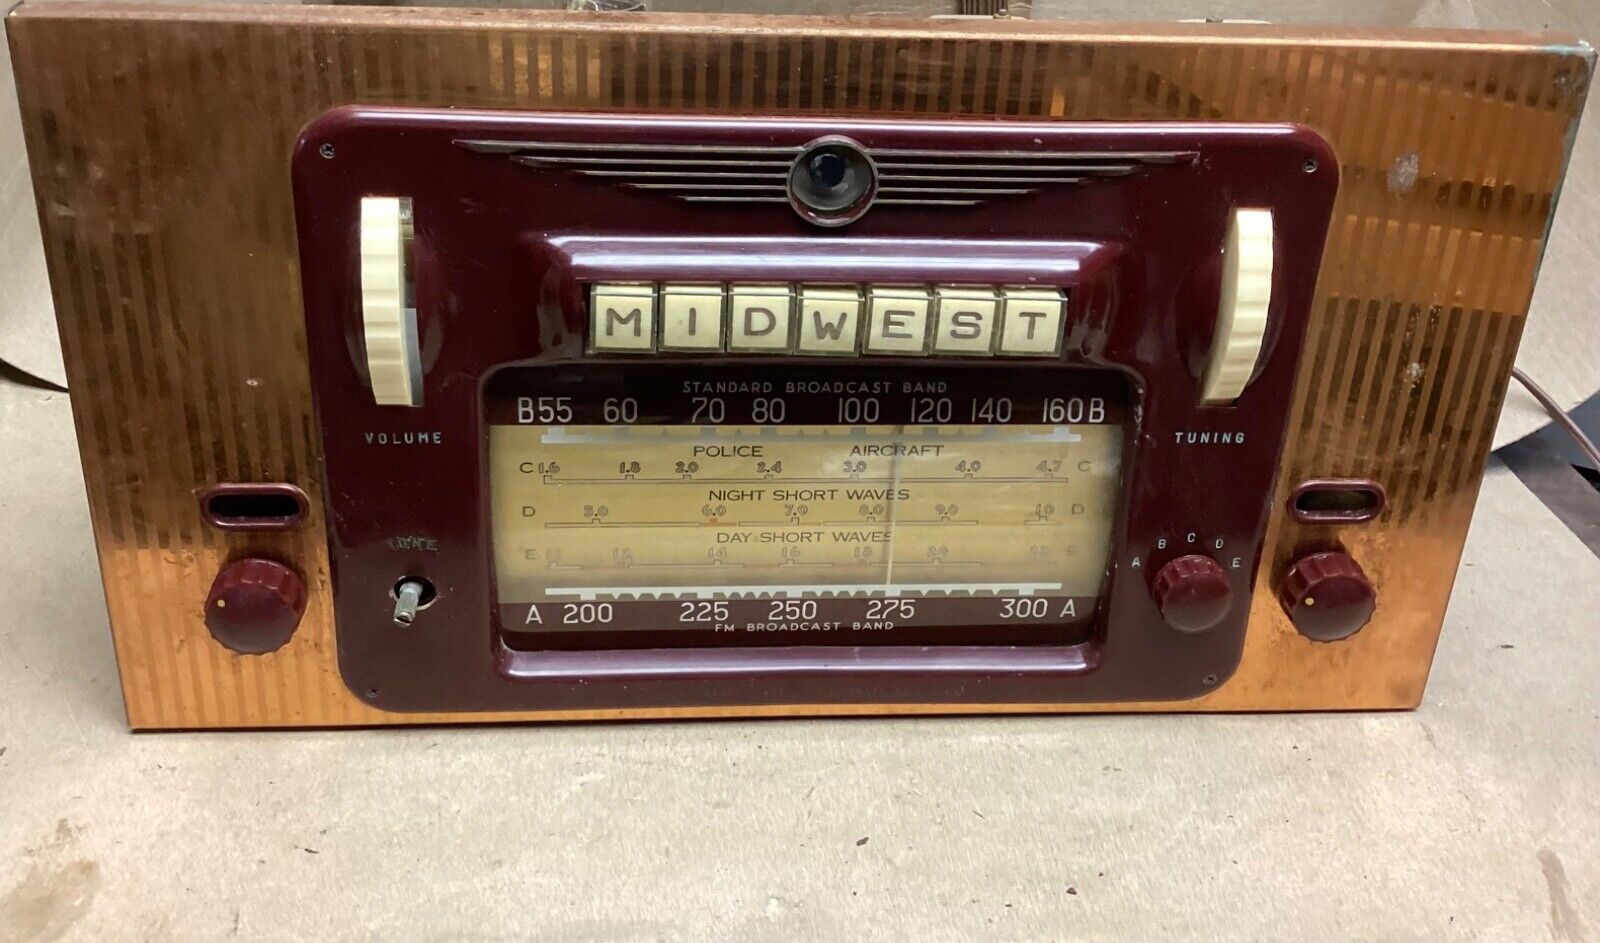 Vintage 1940s Midwest model 816 tube radio 1930-49 for repair, garbled reception